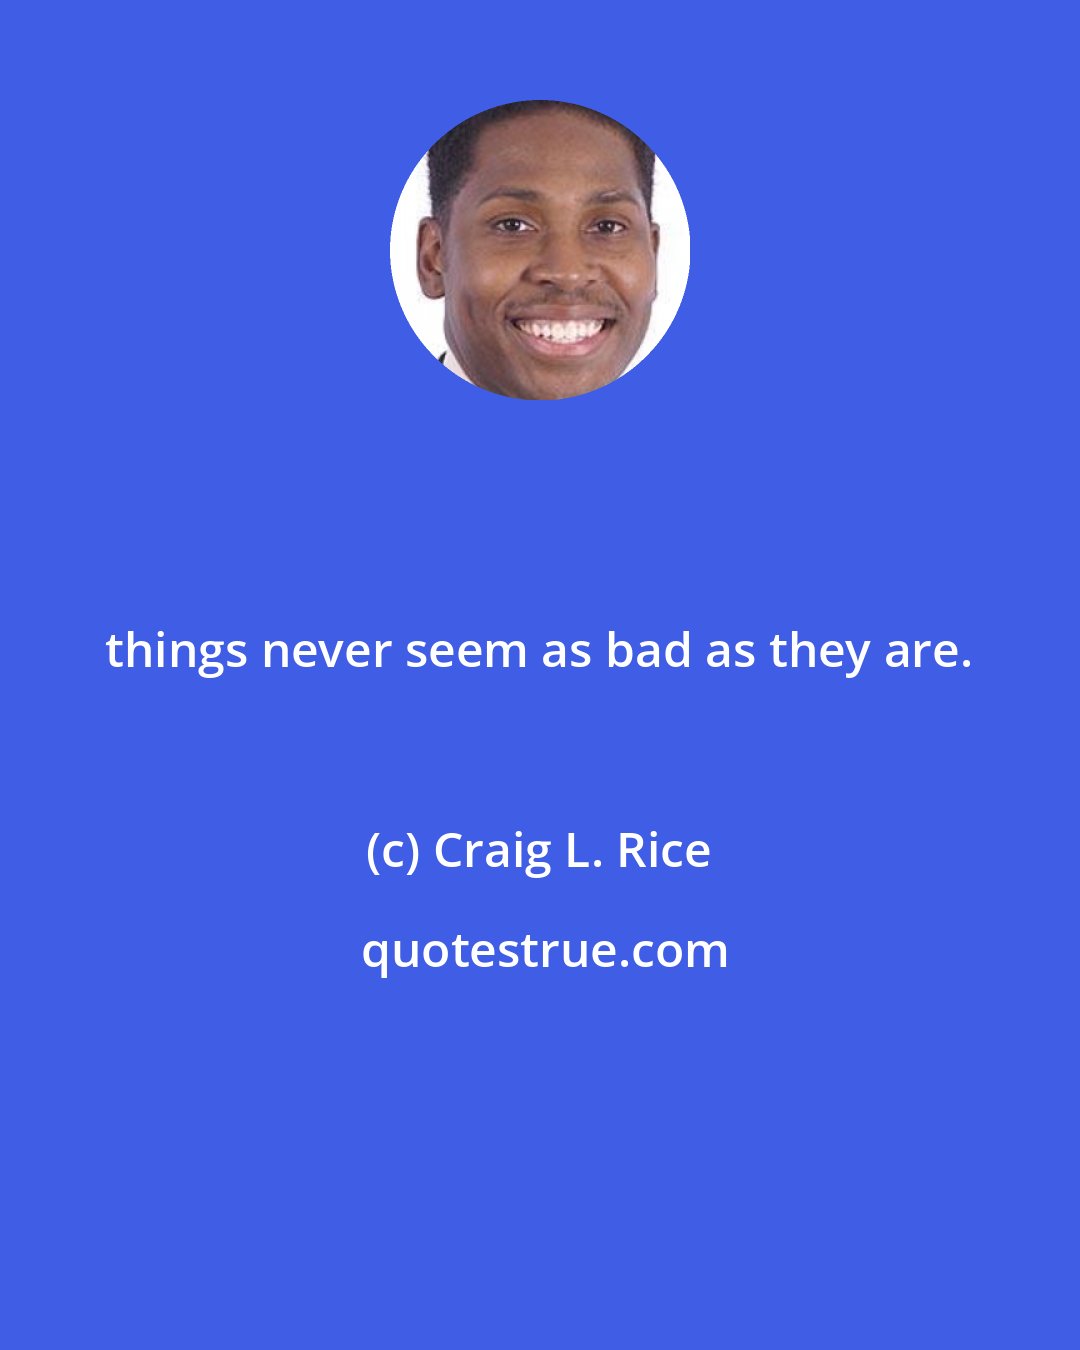 Craig L. Rice: things never seem as bad as they are.